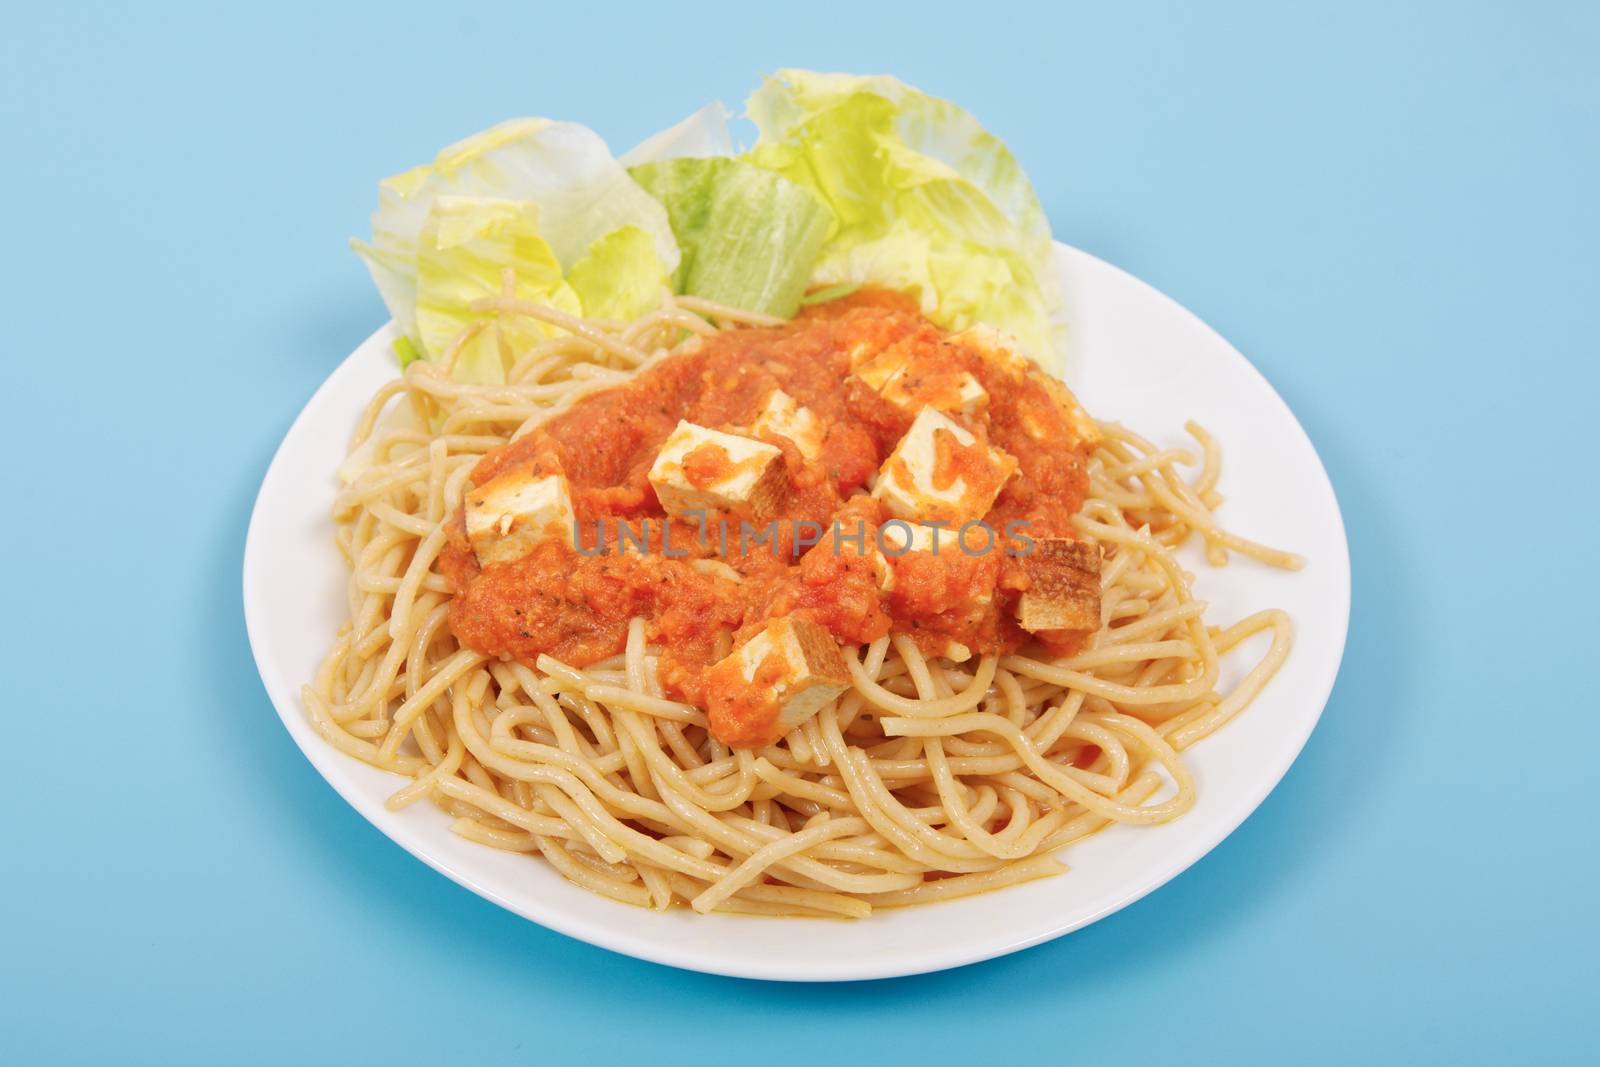 Bolognese spaghetti with tofu on a blue background